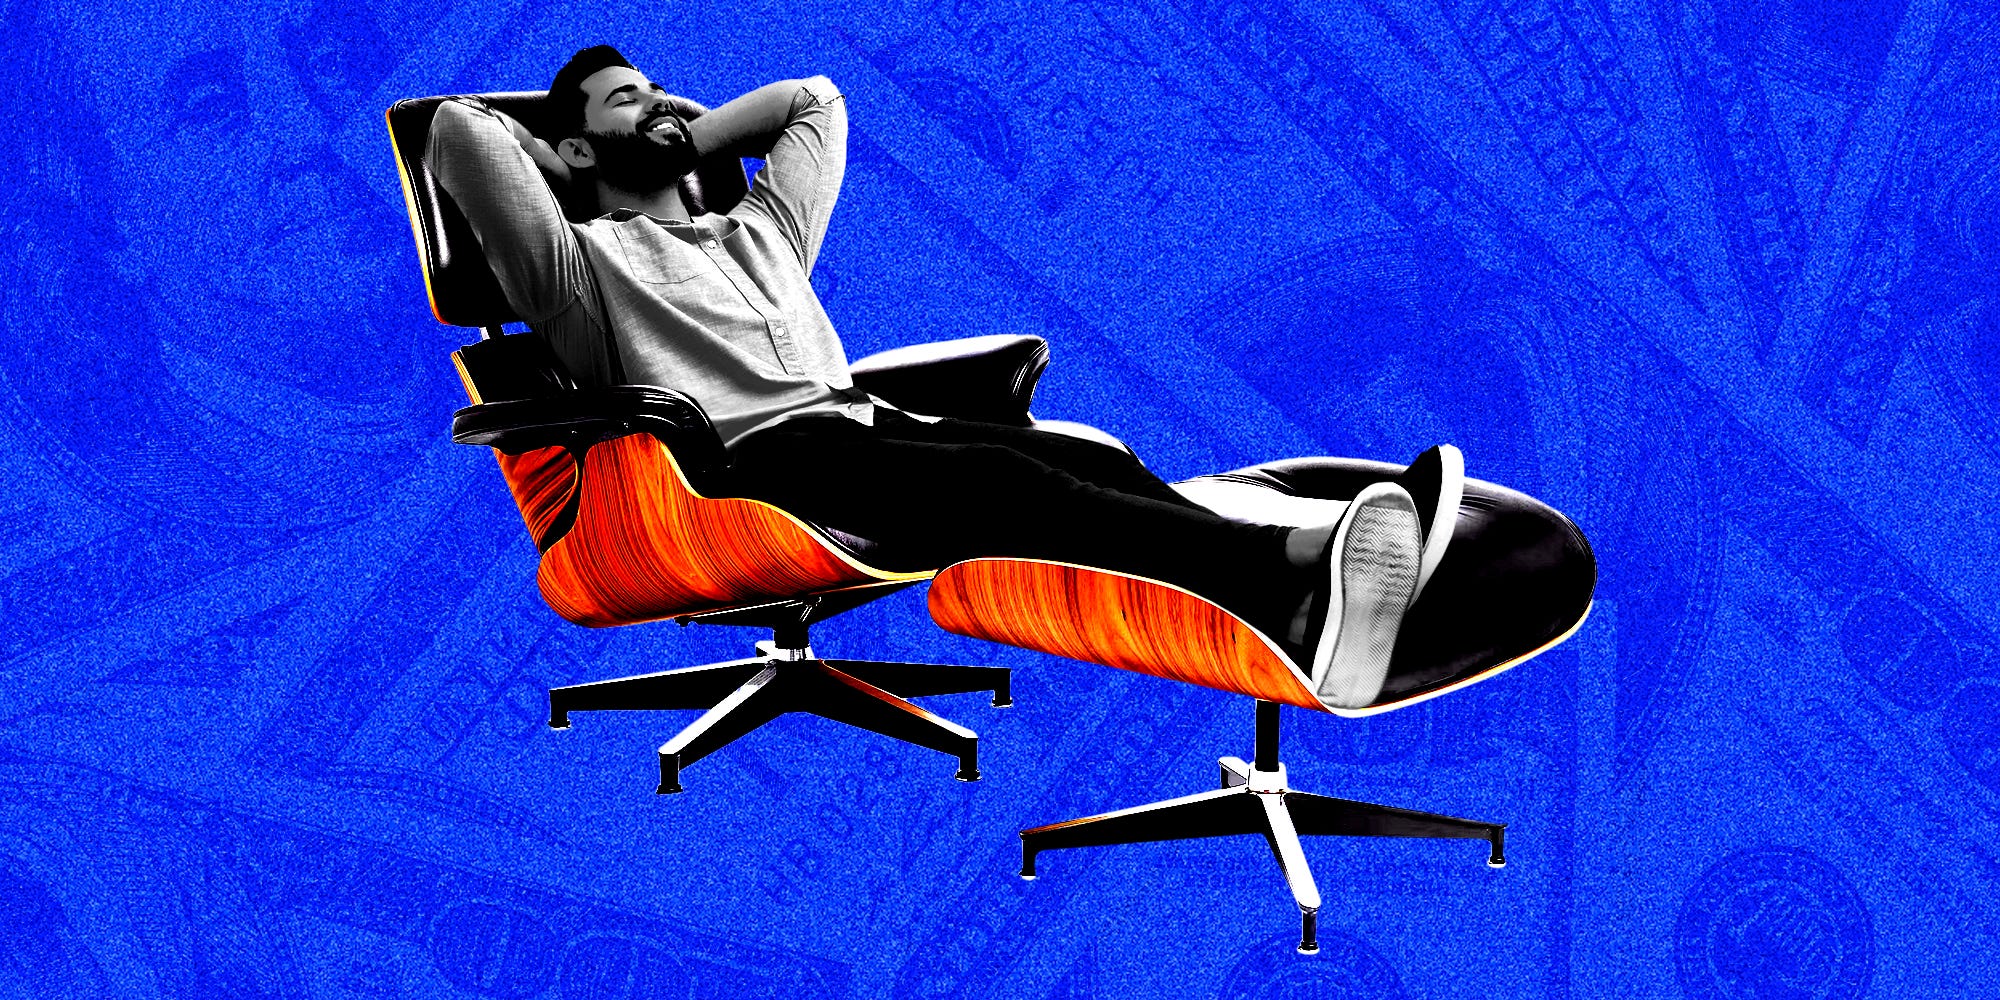 microsoft, the hottest new status symbol for corporate climbers: a $7,000 chair